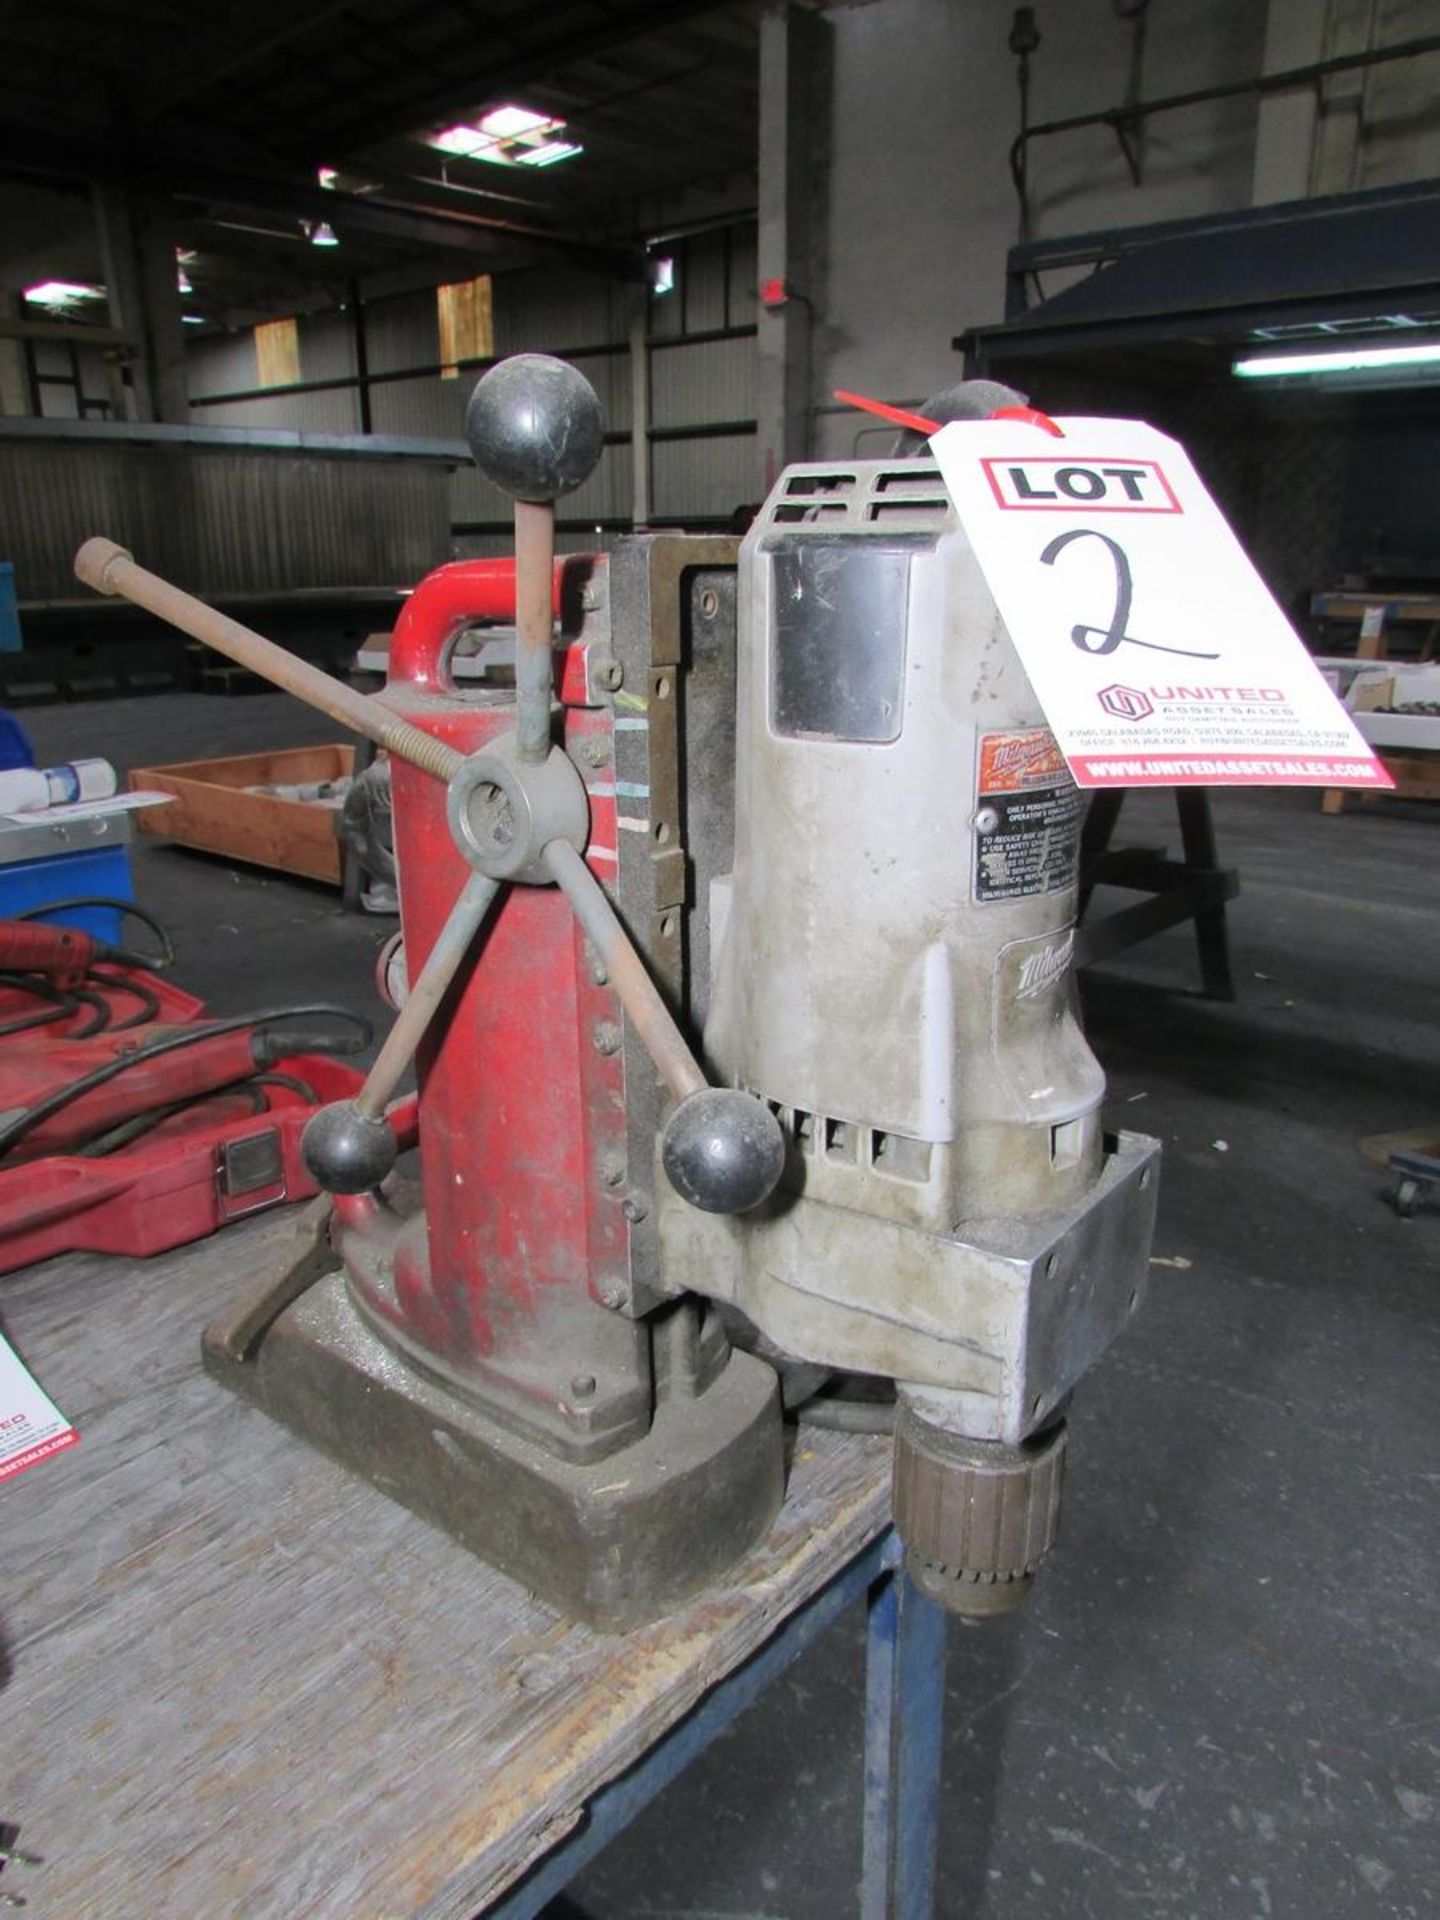 MILWAUKEE 3/4" MAGNETIC BASE DRILL PRESS, MODEL 4231, CAT. NO. 4262-1 DRILL MOTOR